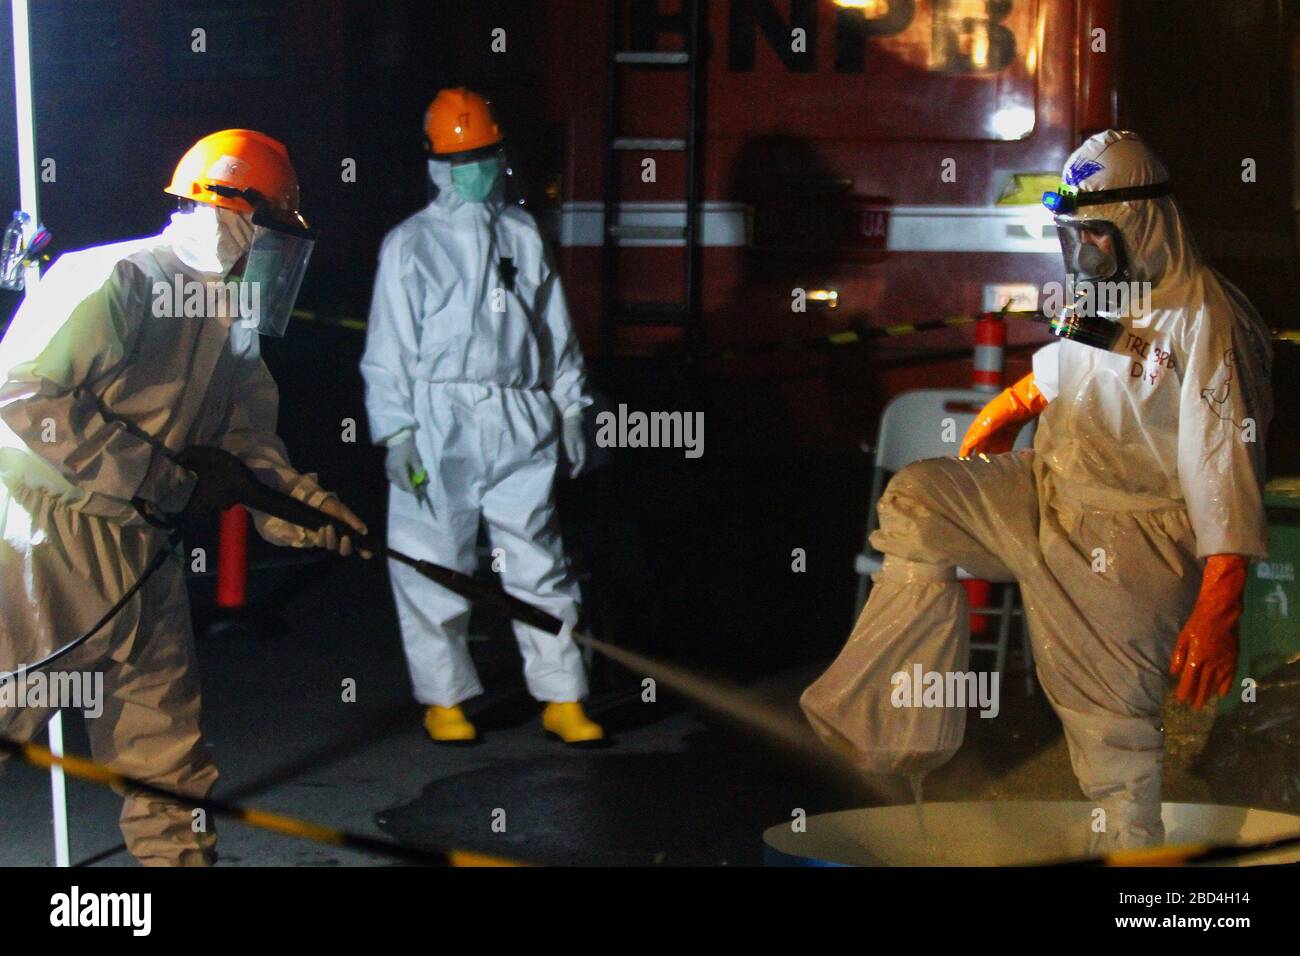 Officers wearing protection suits go through the decontamination area to be sprayed with disinfectant after burying corona virus victims in Yogyakarta, Indonesia, Monday, April 6, 2020. This activity is carried out to clean officers from being contaminated with corona virus or Covid-19. Stock Photo